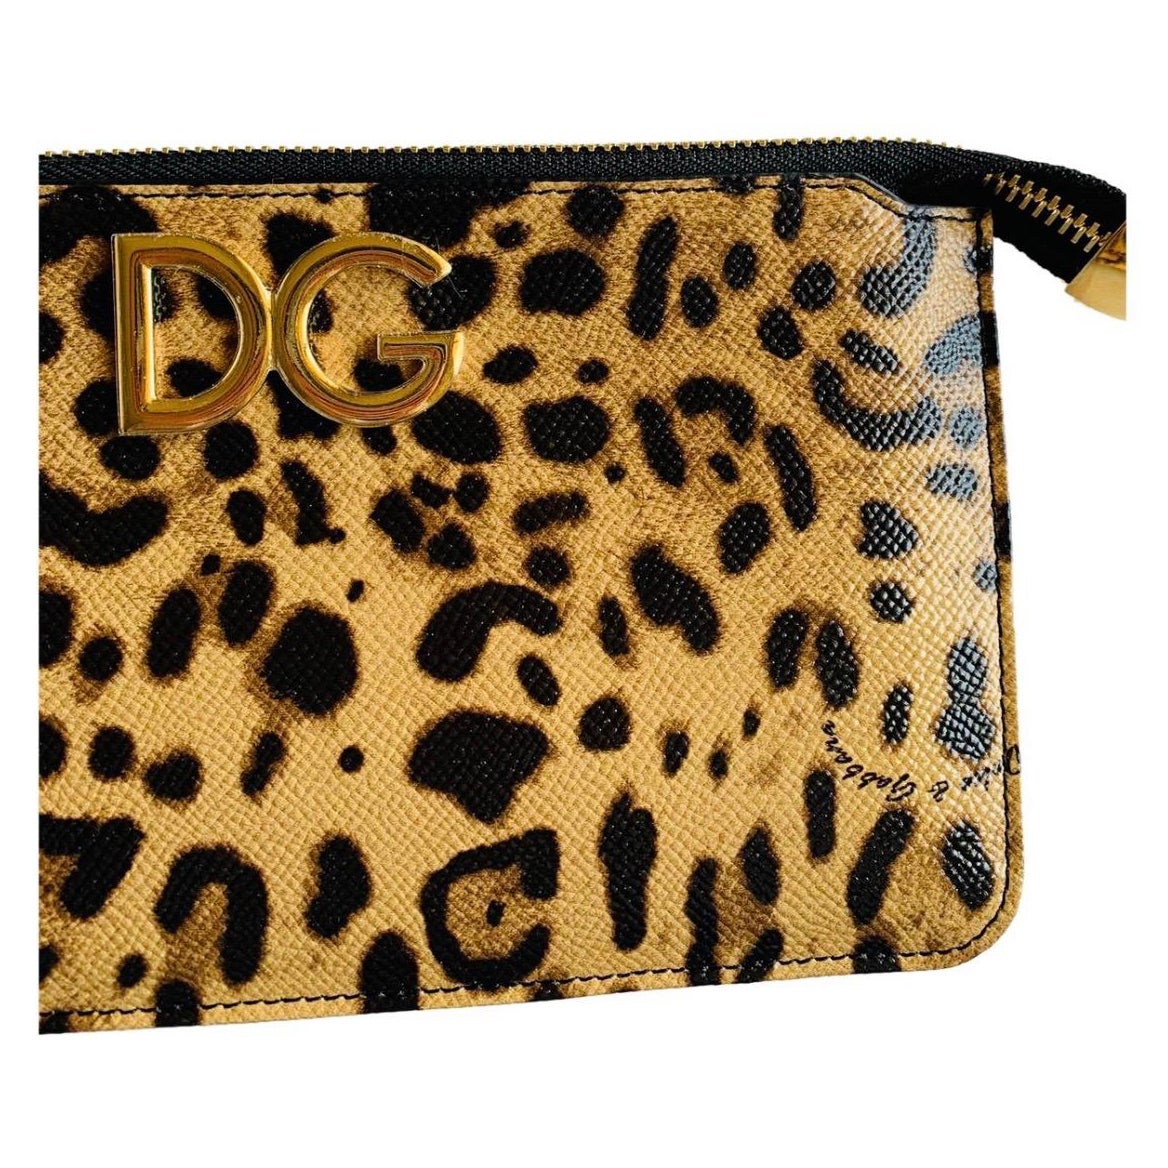 FAUX PATENT LEATHER ANIMAL LEOPARD PRINT EVENING DAY CLUTCH BAG TAN BLACK 